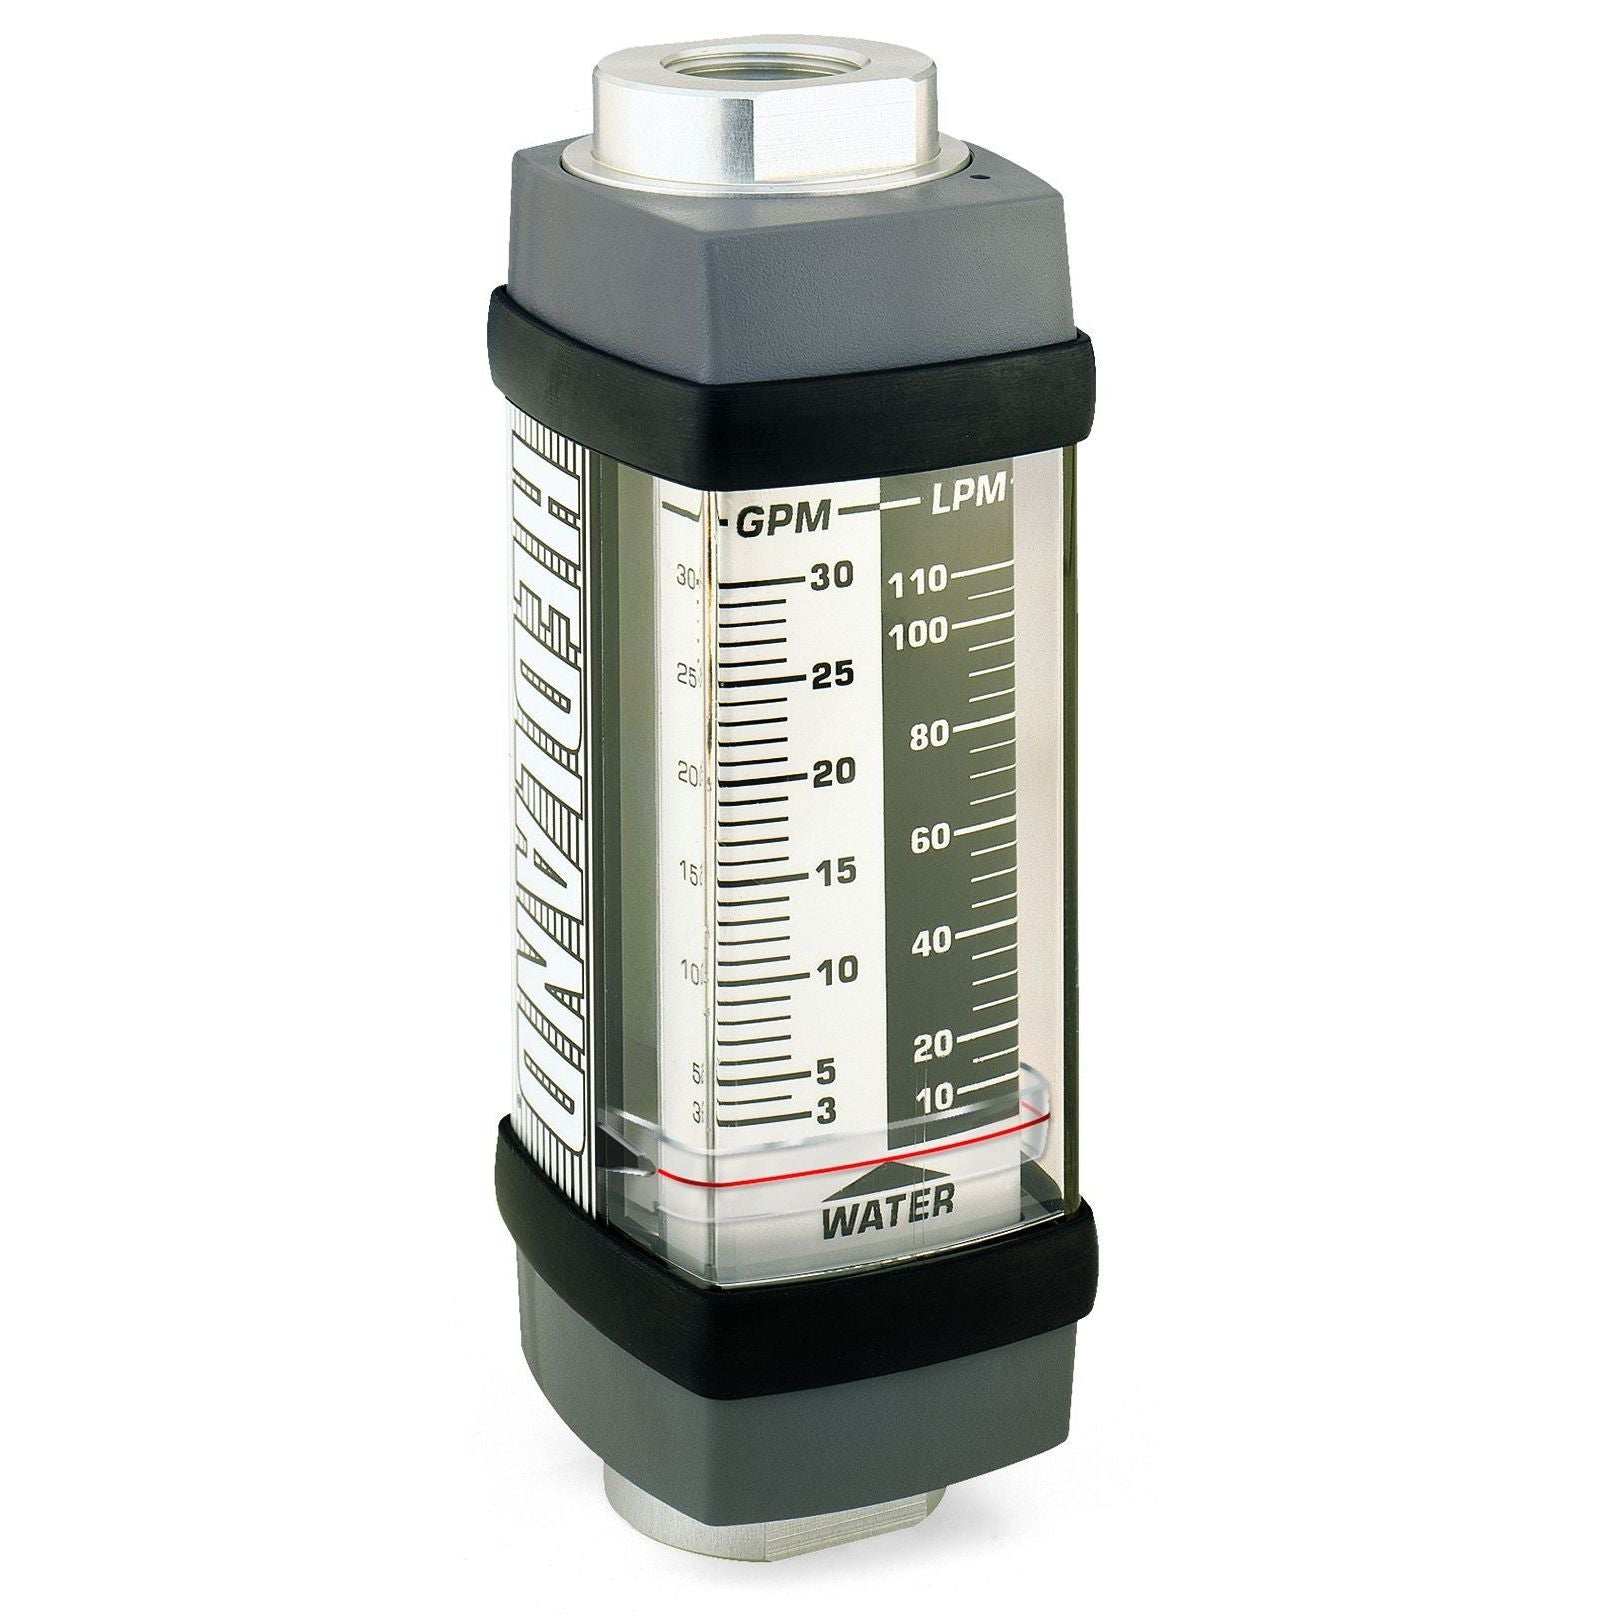 H731X-030 : Hedland 5000psi 316SS Flow Meter for Caustic or Corrosive Liquids, 3/4 NPT, 3 to 30 GPM